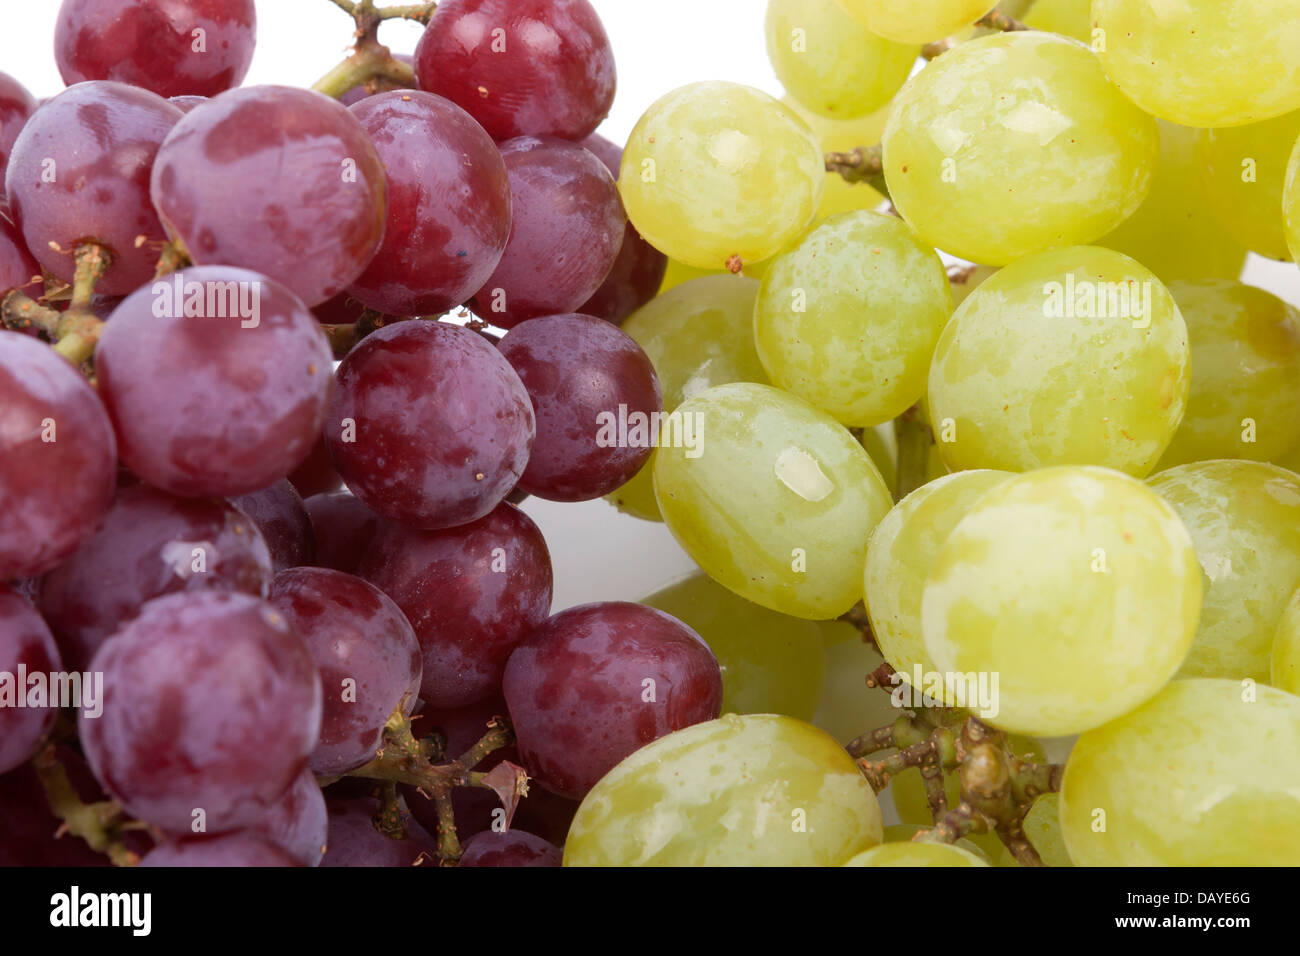 A bunch of green and red grapes isolated on a white background Stock Photo